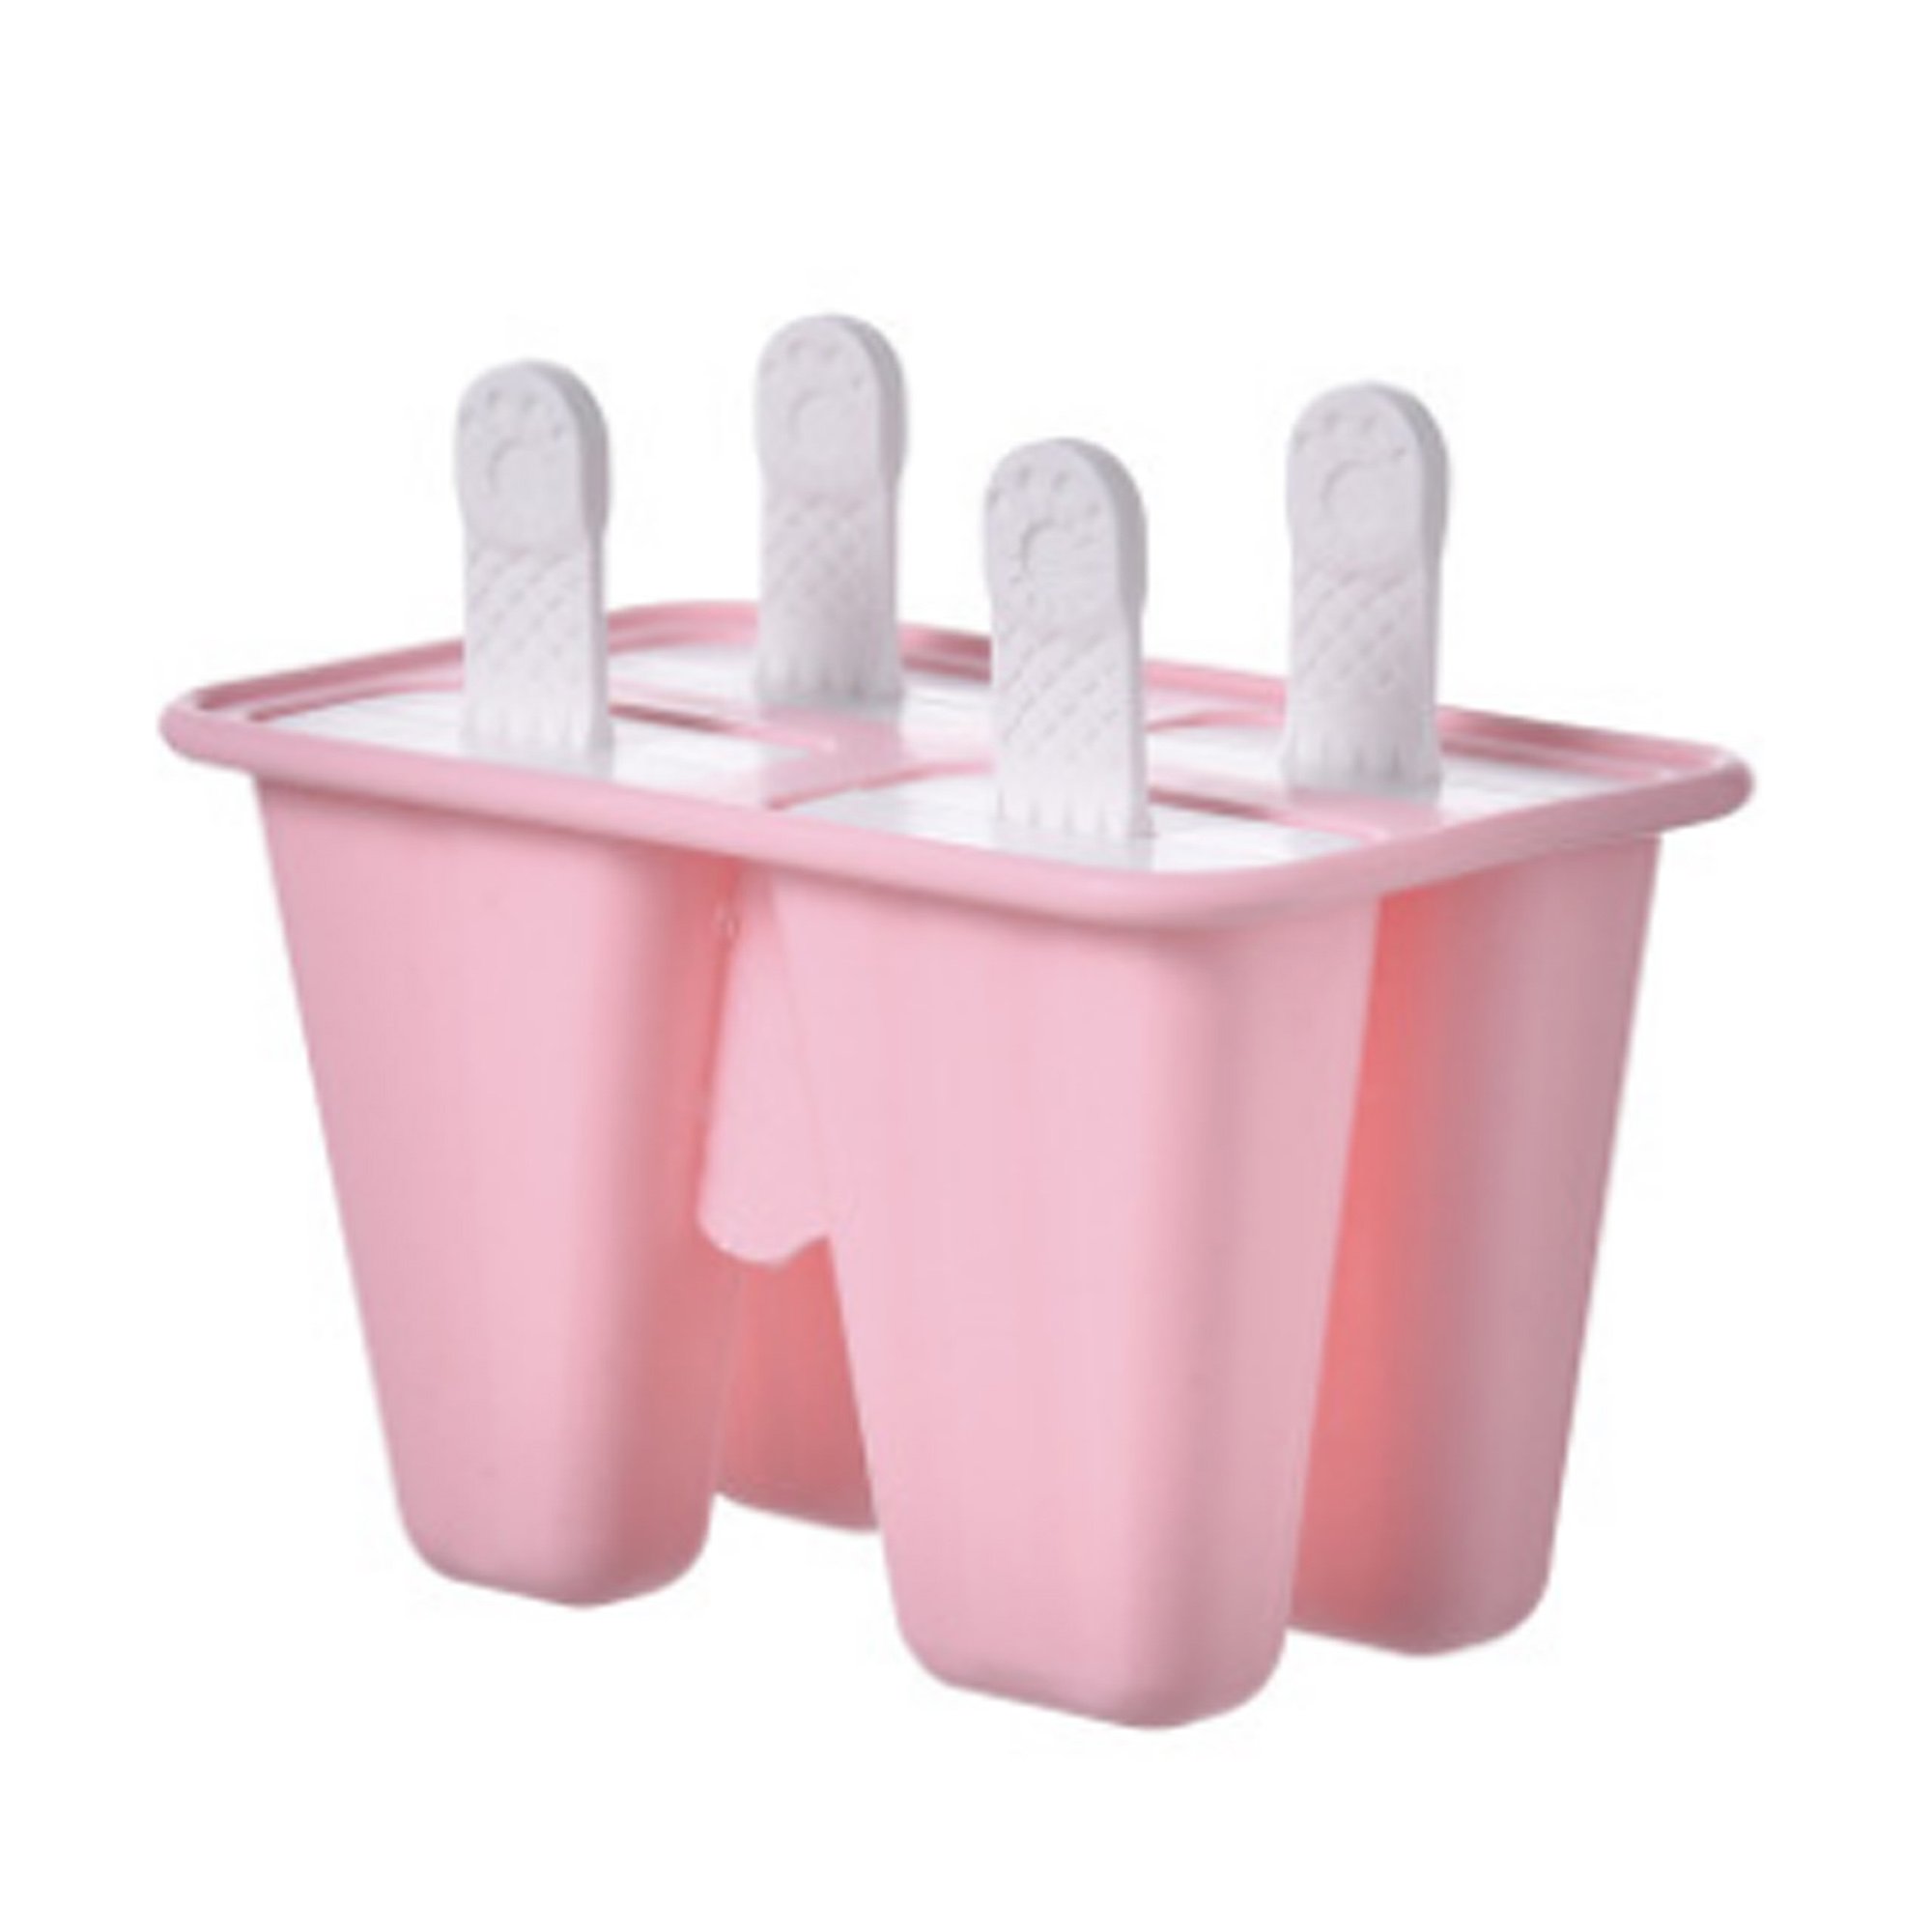 FOCUSNORM Popsicle Mold 4/6 Pieces Silicone Ice Pop Molds ...